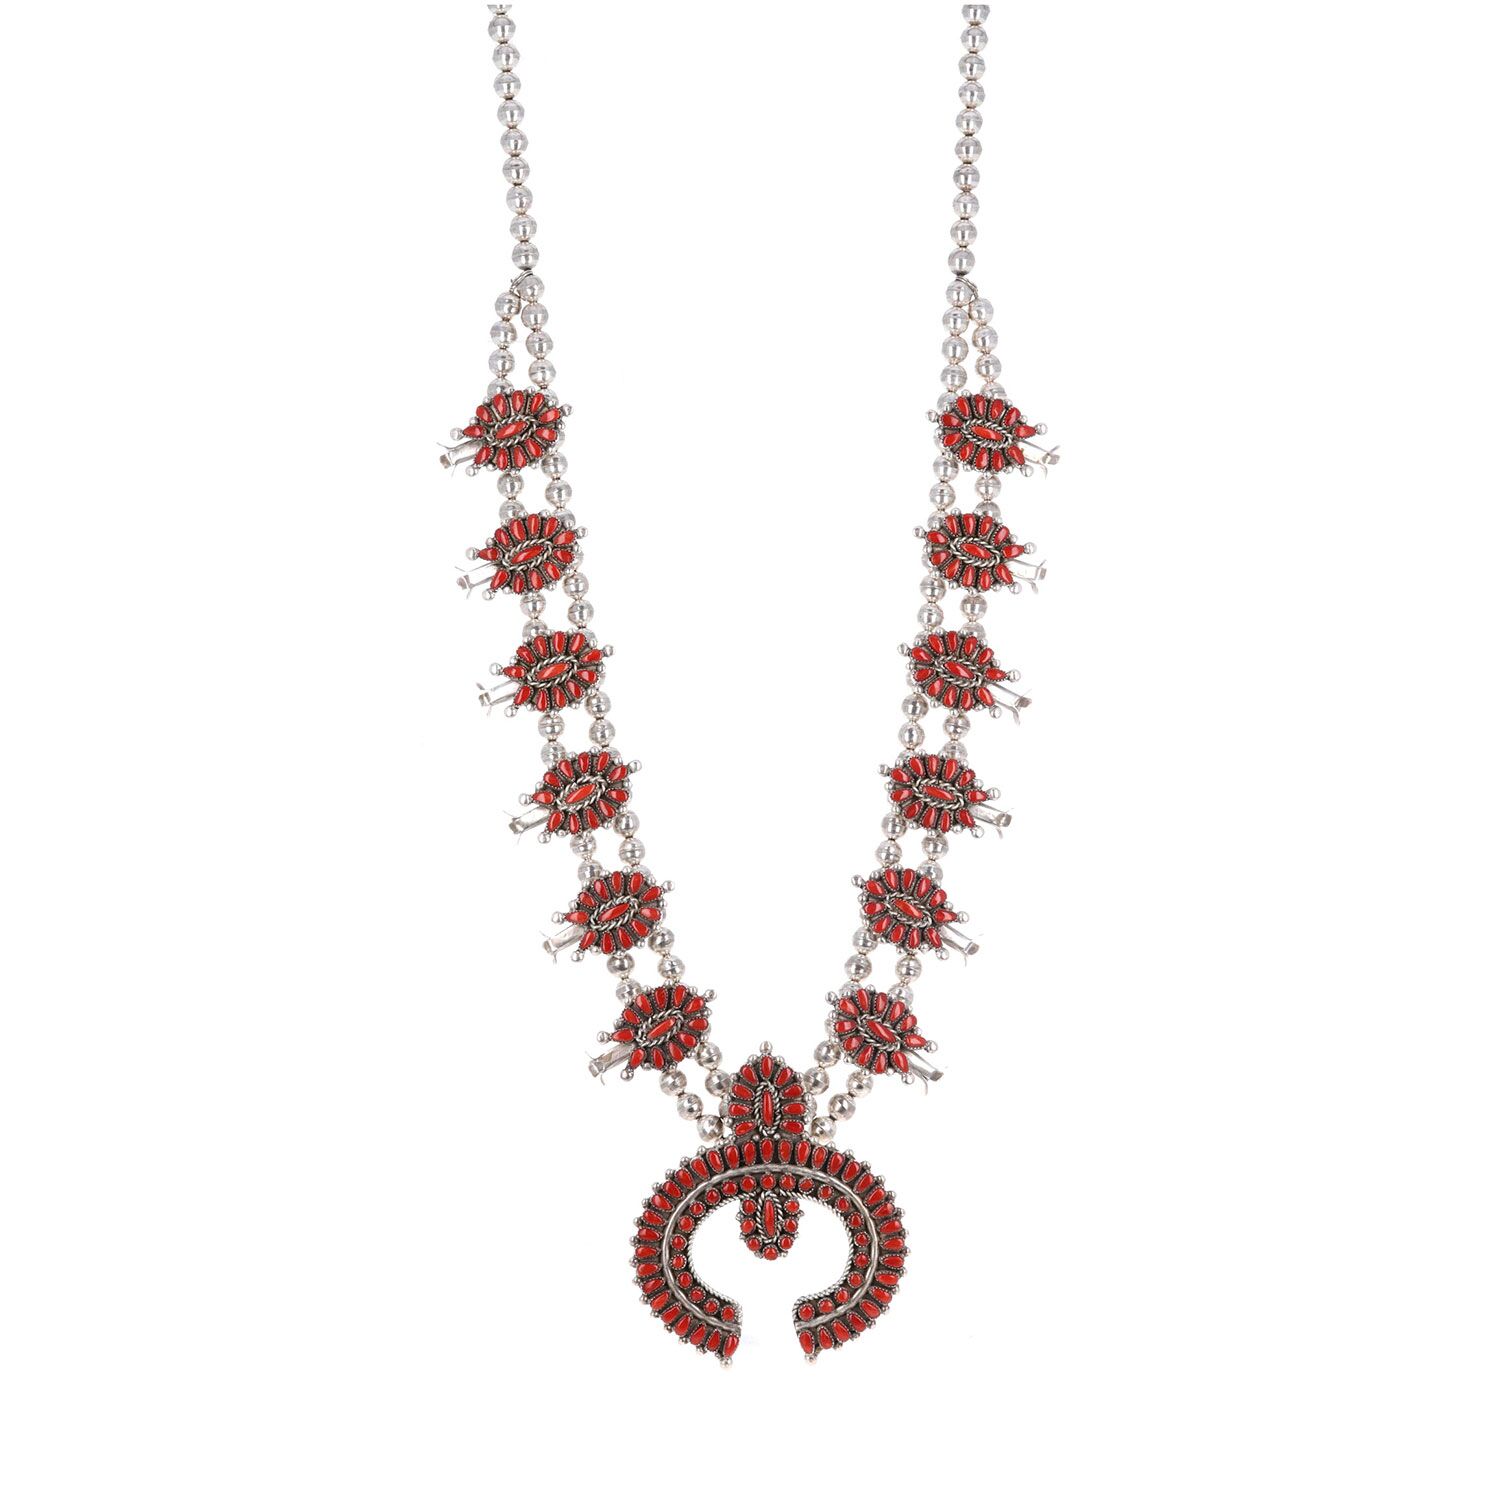 Red Coral Squash Blossom Necklace with Matching Earrings – Buckin' Flamingo